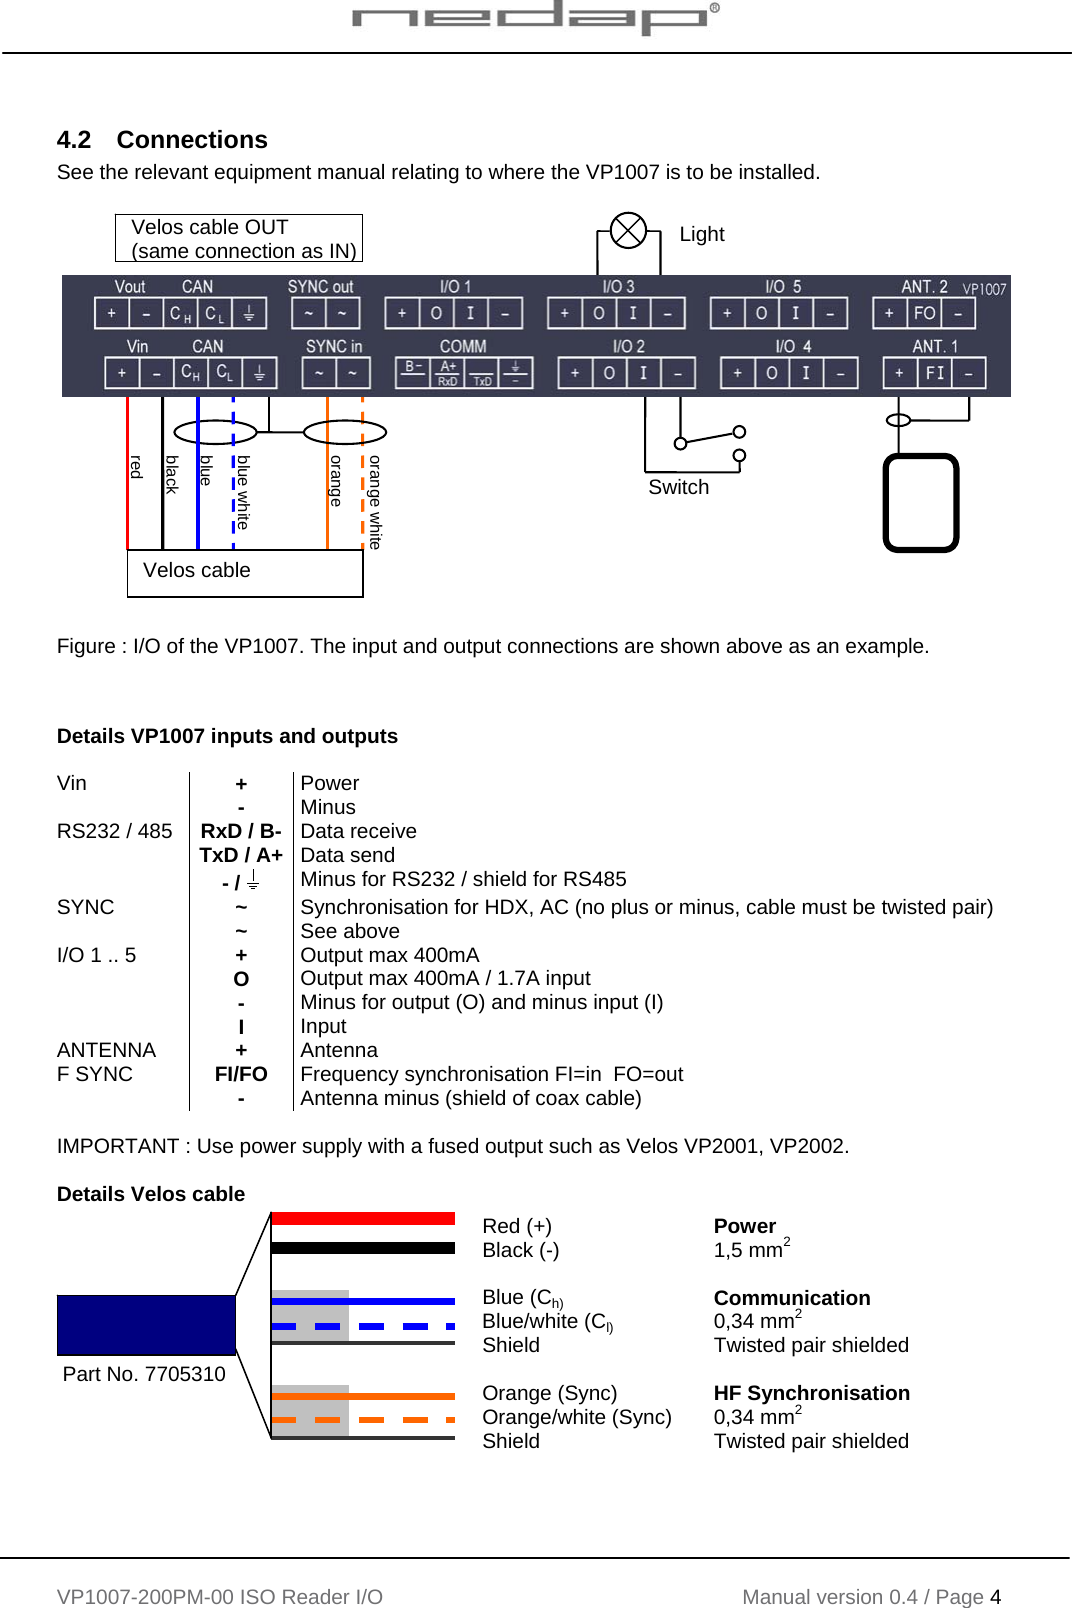    VP1007-200PM-00 ISO Reader I/O Manual version 0.4 / Page 4    4.2 Connections See the relevant equipment manual relating to where the VP1007 is to be installed.    Figure : I/O of the VP1007. The input and output connections are shown above as an example.   Details VP1007 inputs and outputs  Vin  +  Power   -  Minus  RS232 / 485  RxD / B- Data receive  TxD / A+ Data send  - /   Minus for RS232 / shield for RS485 SYNC  ~  Synchronisation for HDX, AC (no plus or minus, cable must be twisted pair)  ~  See above I/O 1 .. 5  +  Output max 400mA  O  Output max 400mA / 1.7A input  -  Minus for output (O) and minus input (I)  I  Input ANTENNA  +  Antenna F SYNC  FI/FO  Frequency synchronisation FI=in  FO=out  -  Antenna minus (shield of coax cable)  IMPORTANT : Use power supply with a fused output such as Velos VP2001, VP2002.  Details Velos cable  orangeblue white blue black red orange white Velos cable SwitchLight Velos cable OUT (same connection as IN) Red (+) Black (-)  Blue (Ch) Blue/white (Cl) Shield  Orange (Sync) Orange/white (Sync) Shield Power 1,5 mm2  Communication 0,34 mm2 Twisted pair shielded  HF Synchronisation 0,34 mm2 Twisted pair shielded Part No. 7705310 